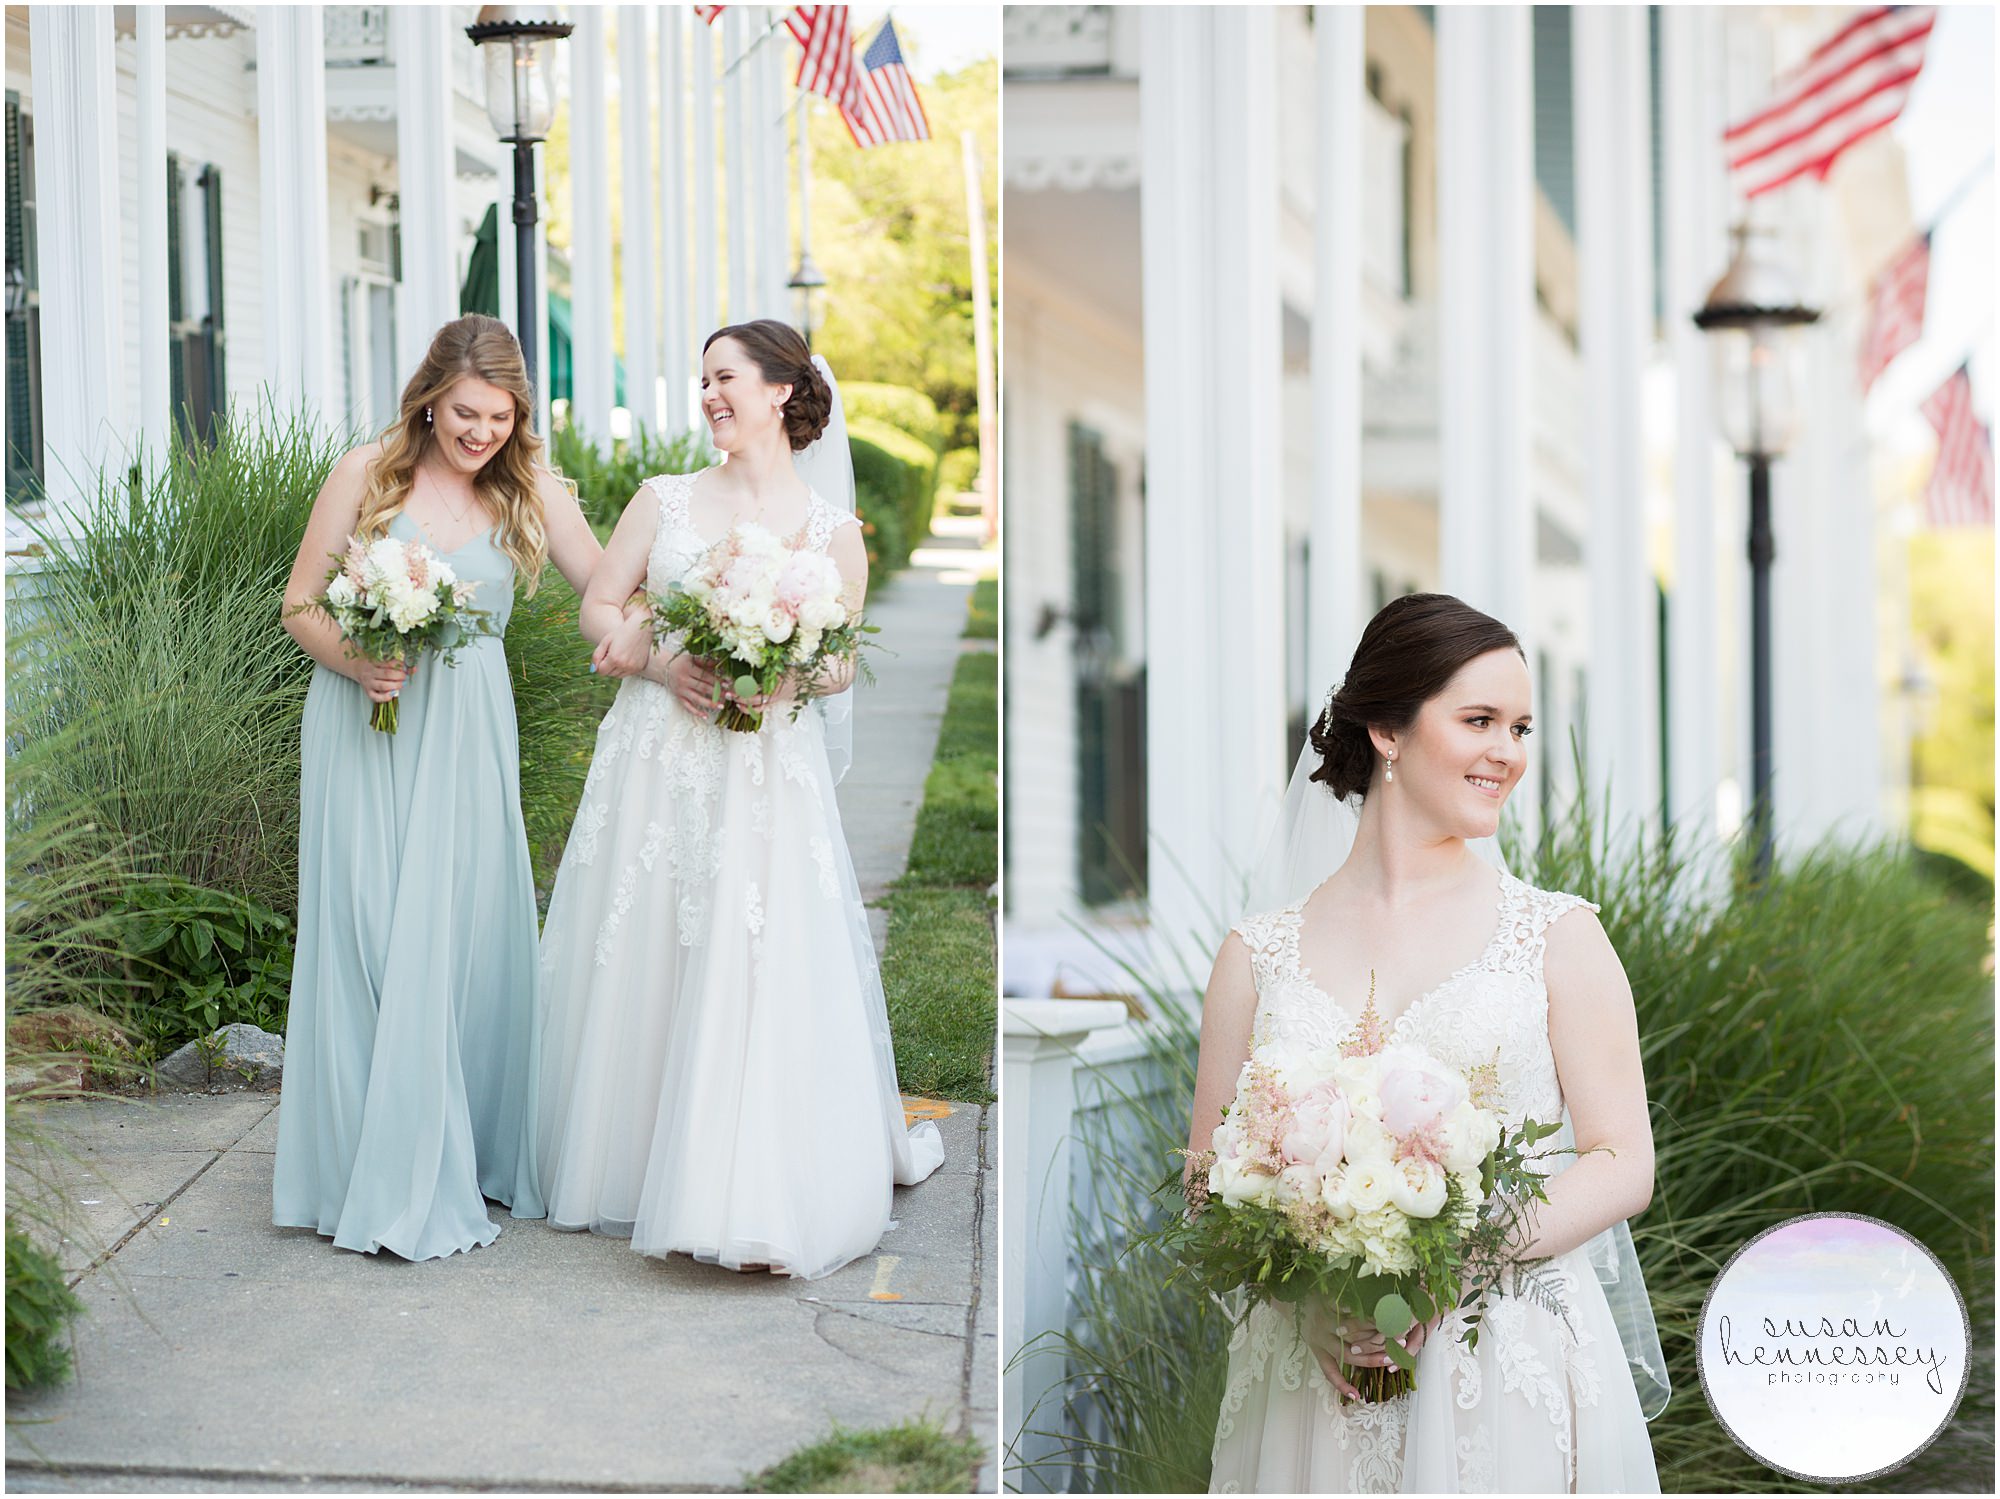 A bride and her maid of honor at the Chalfonte Hotel